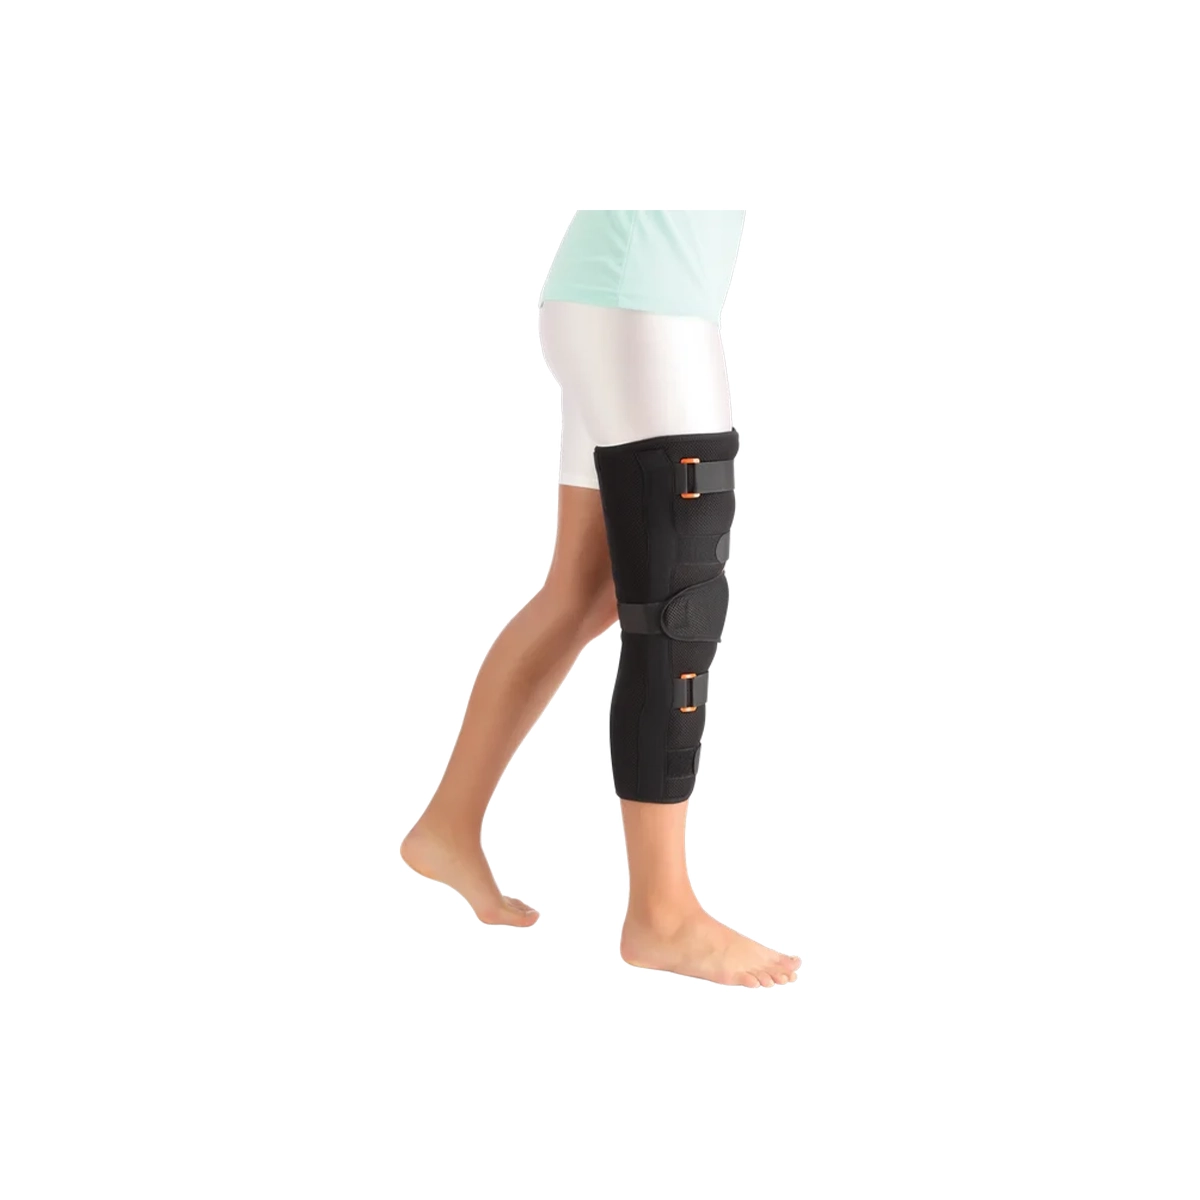 First product image of Flamingo Knee Immobilizer 17" OC 2035 S